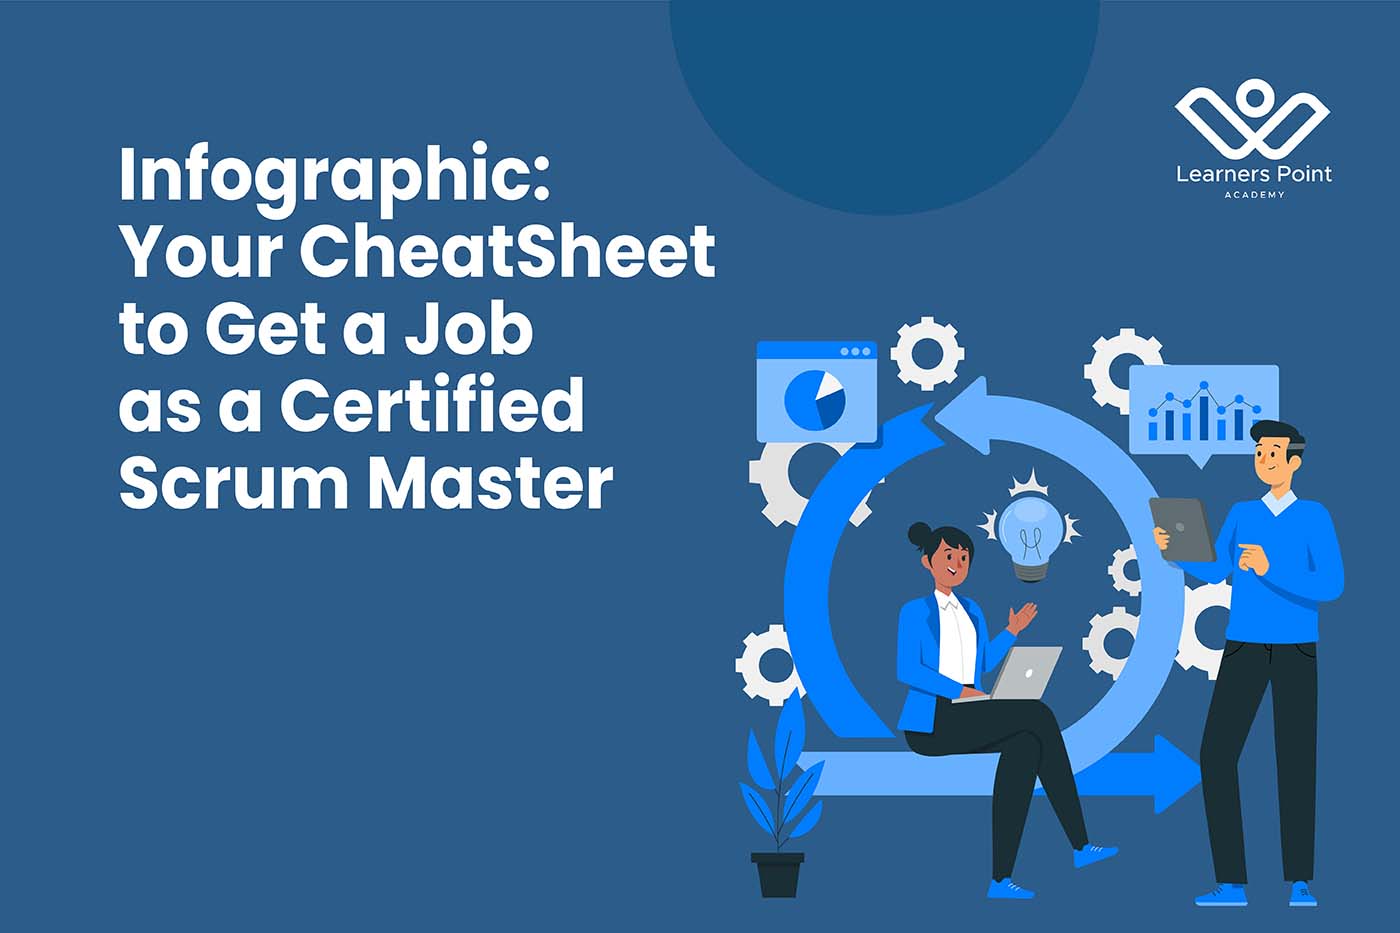 Infographic: Your CheatSheet to Get a Job as a Certified Scrum Master